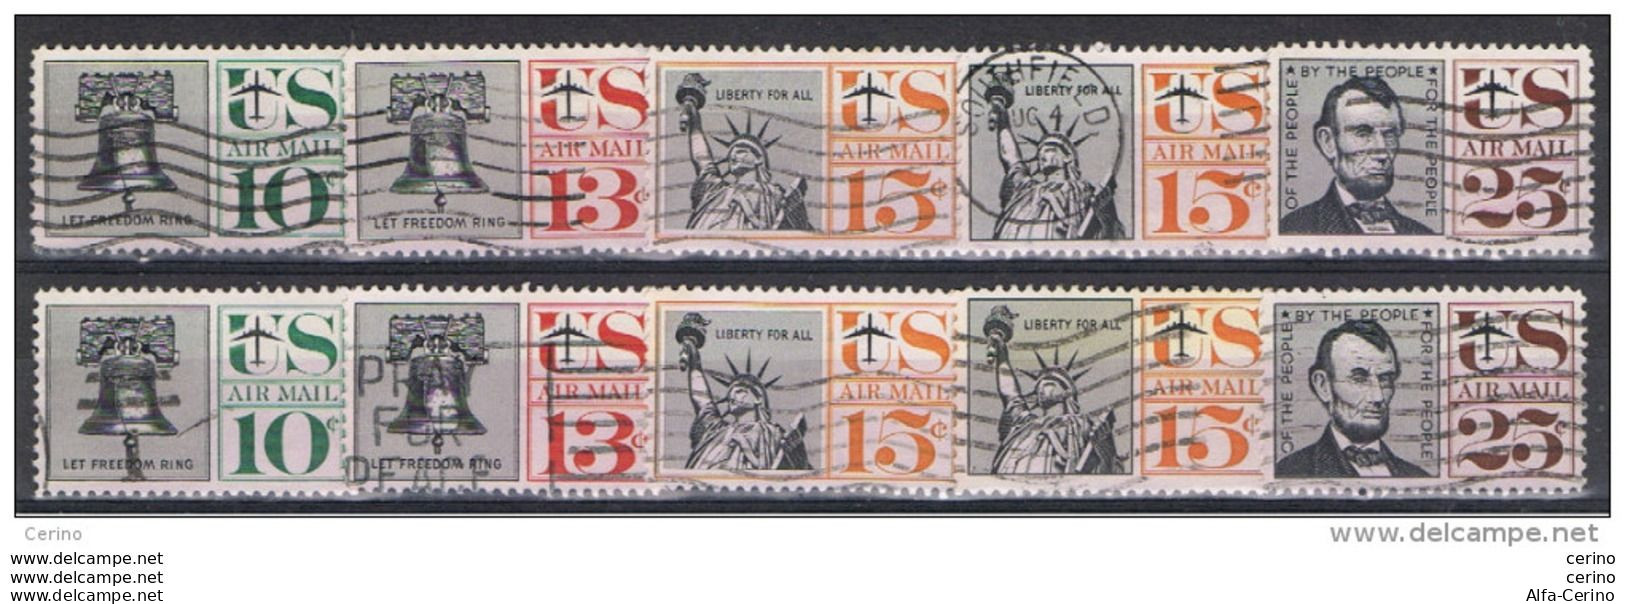 U.S.A.:  1959/61  AIR  MAIL  -  KOMPLET  SET  5  USED  STAMPS  -  REP.  2  EXEMPLARY  -  YV/TELL. 56/60 - 2a. 1941-1960 Afgestempeld